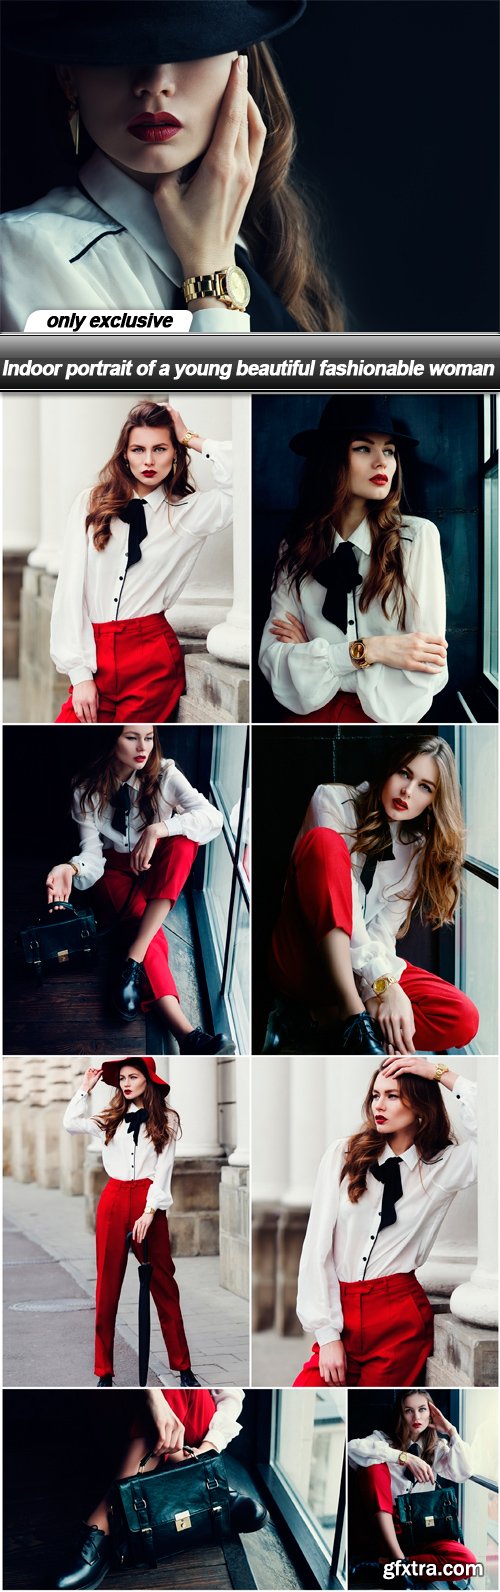 Indoor portrait of a young beautiful fashionable woman - 9 UHQ JPEG